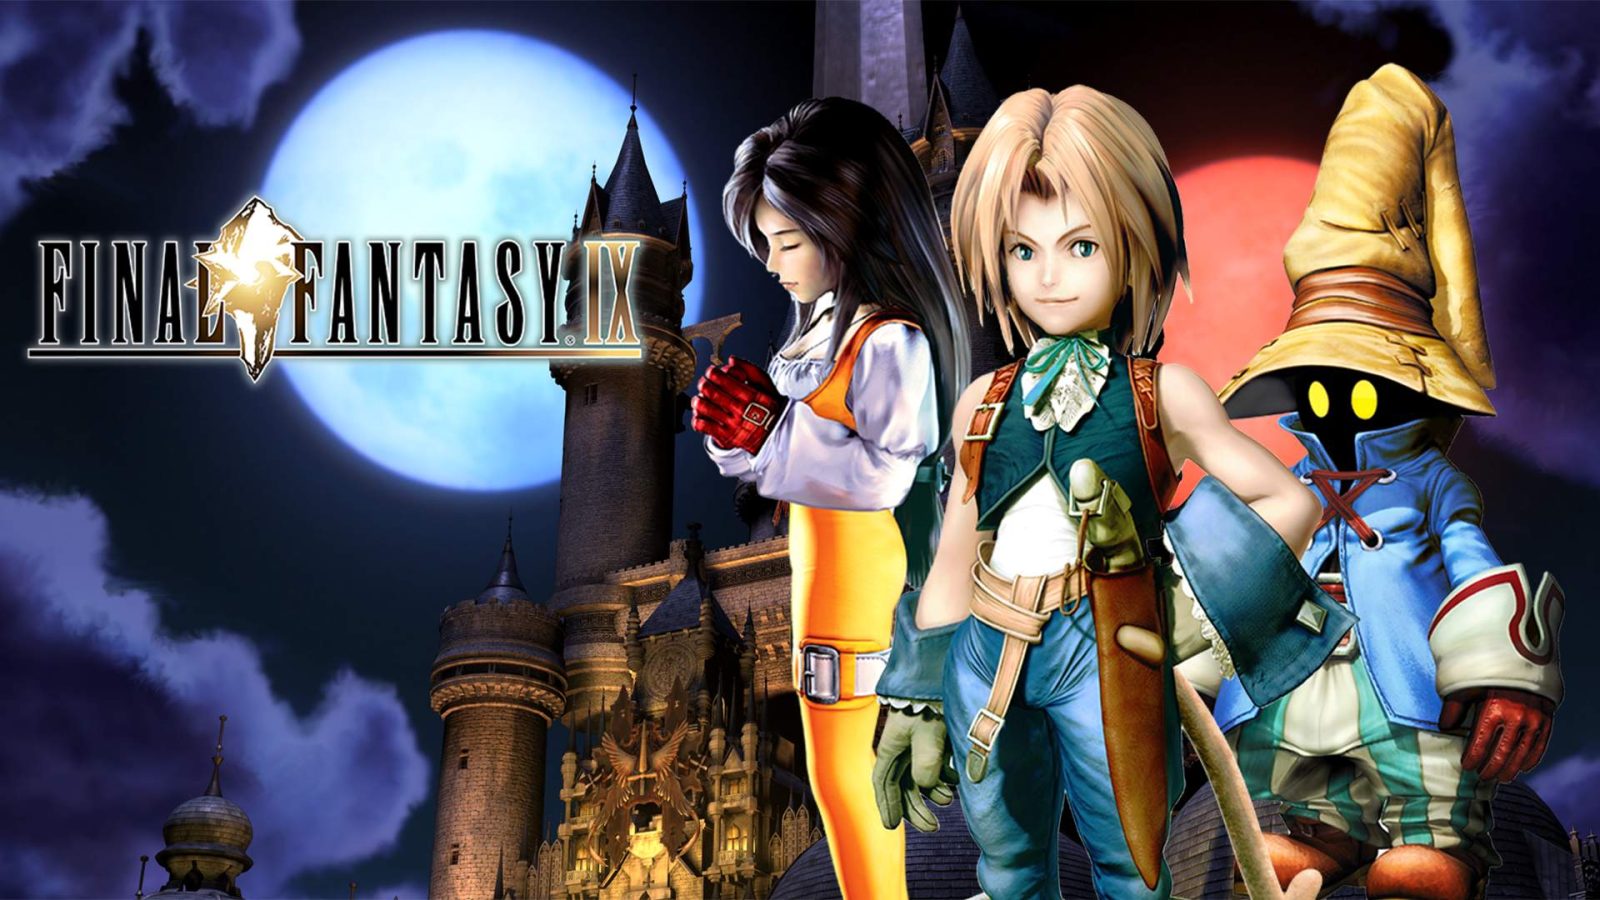 Today’s best Android app deals: FINAL FANTASY IX, LIMBO, Galaxy Trader, more